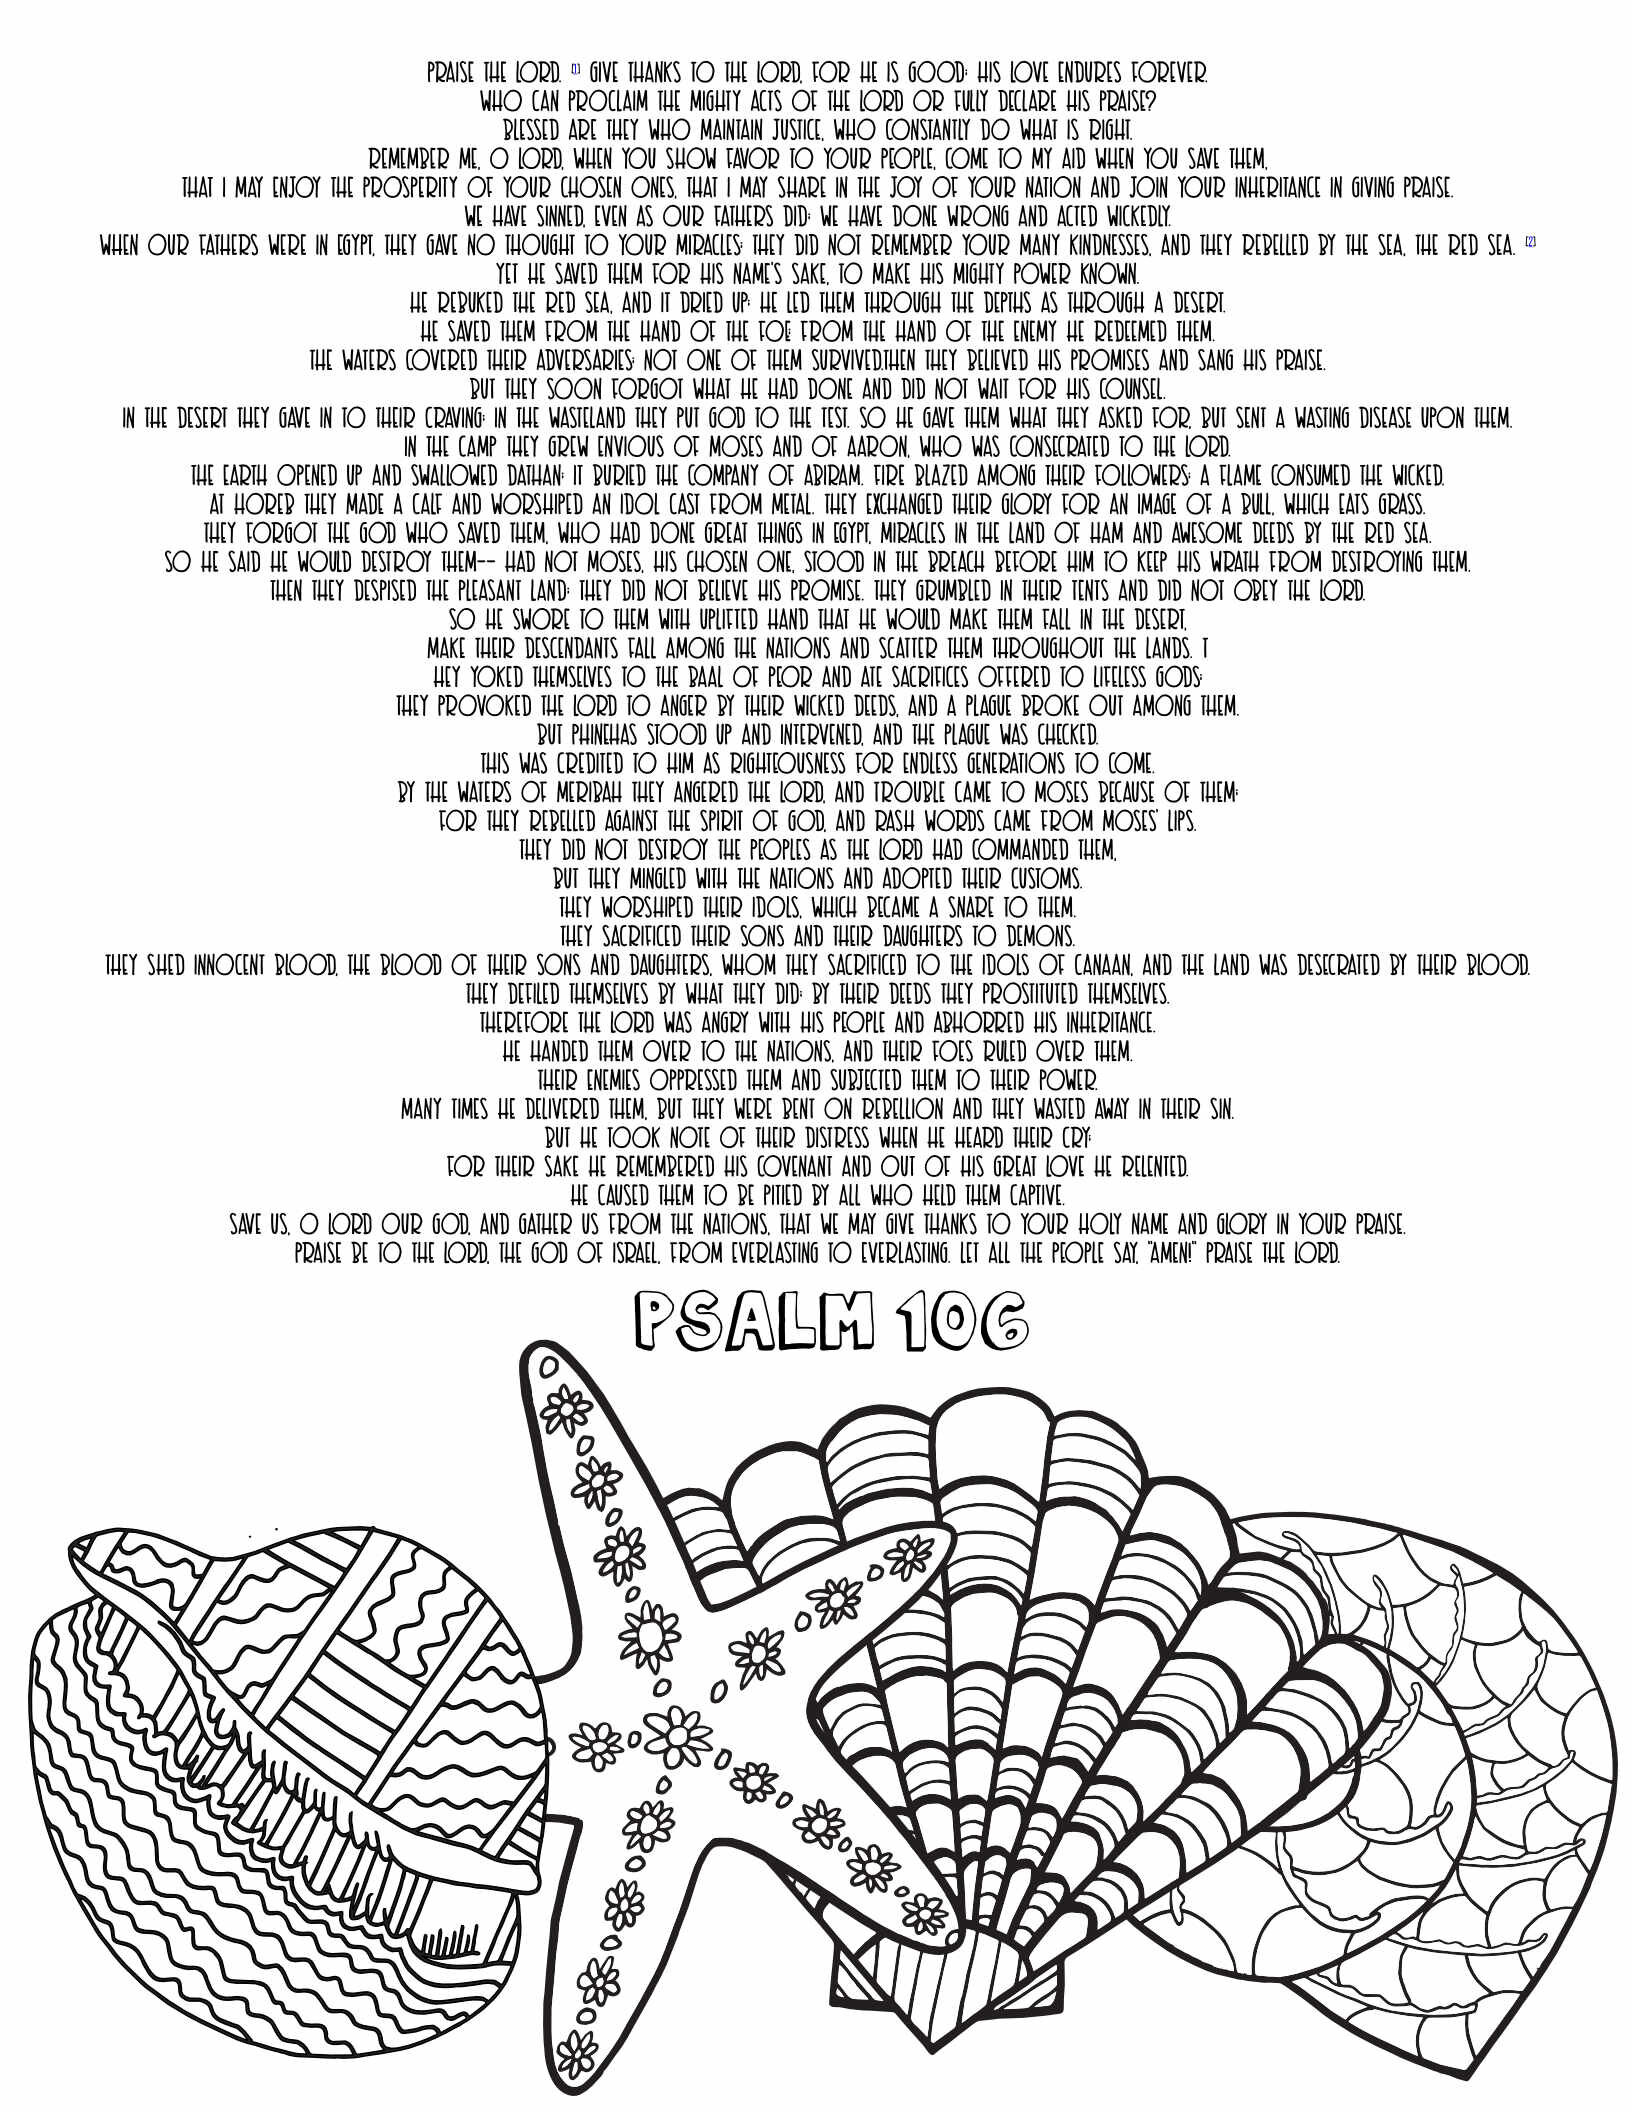 10 Free Printable Psalm Coloring Pages - Download and Color Adult Scripture - Psalm 106CLICK HERE TO DOWNLOAD THIS PAGE FREE